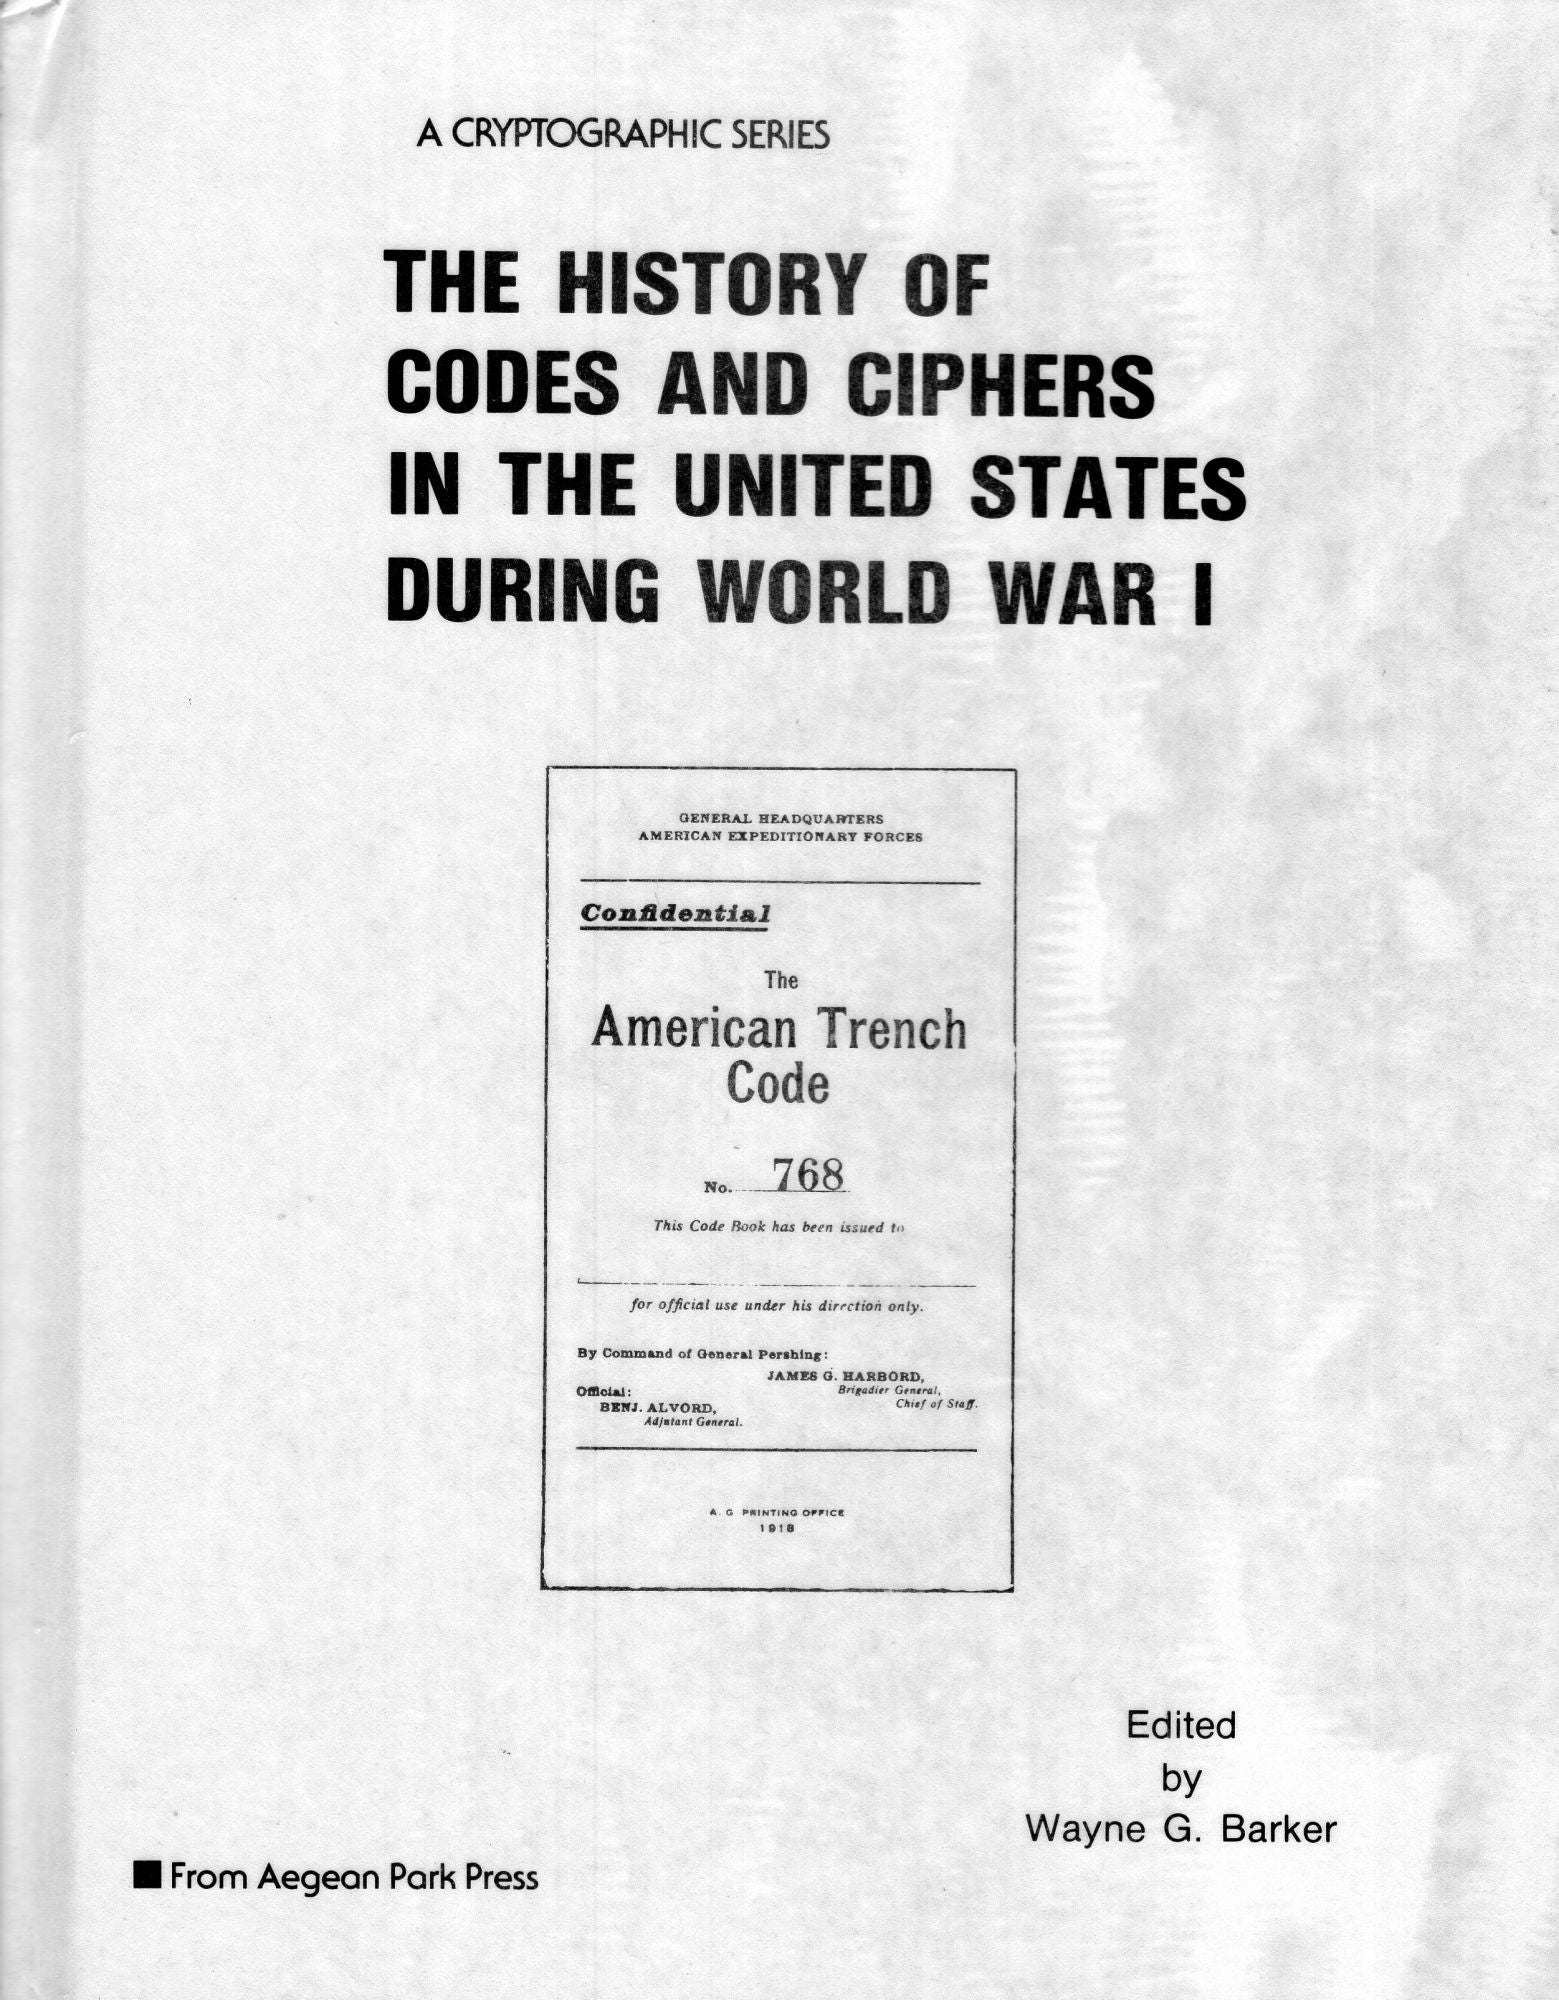 Overview of Civil War Codes and Ciphers